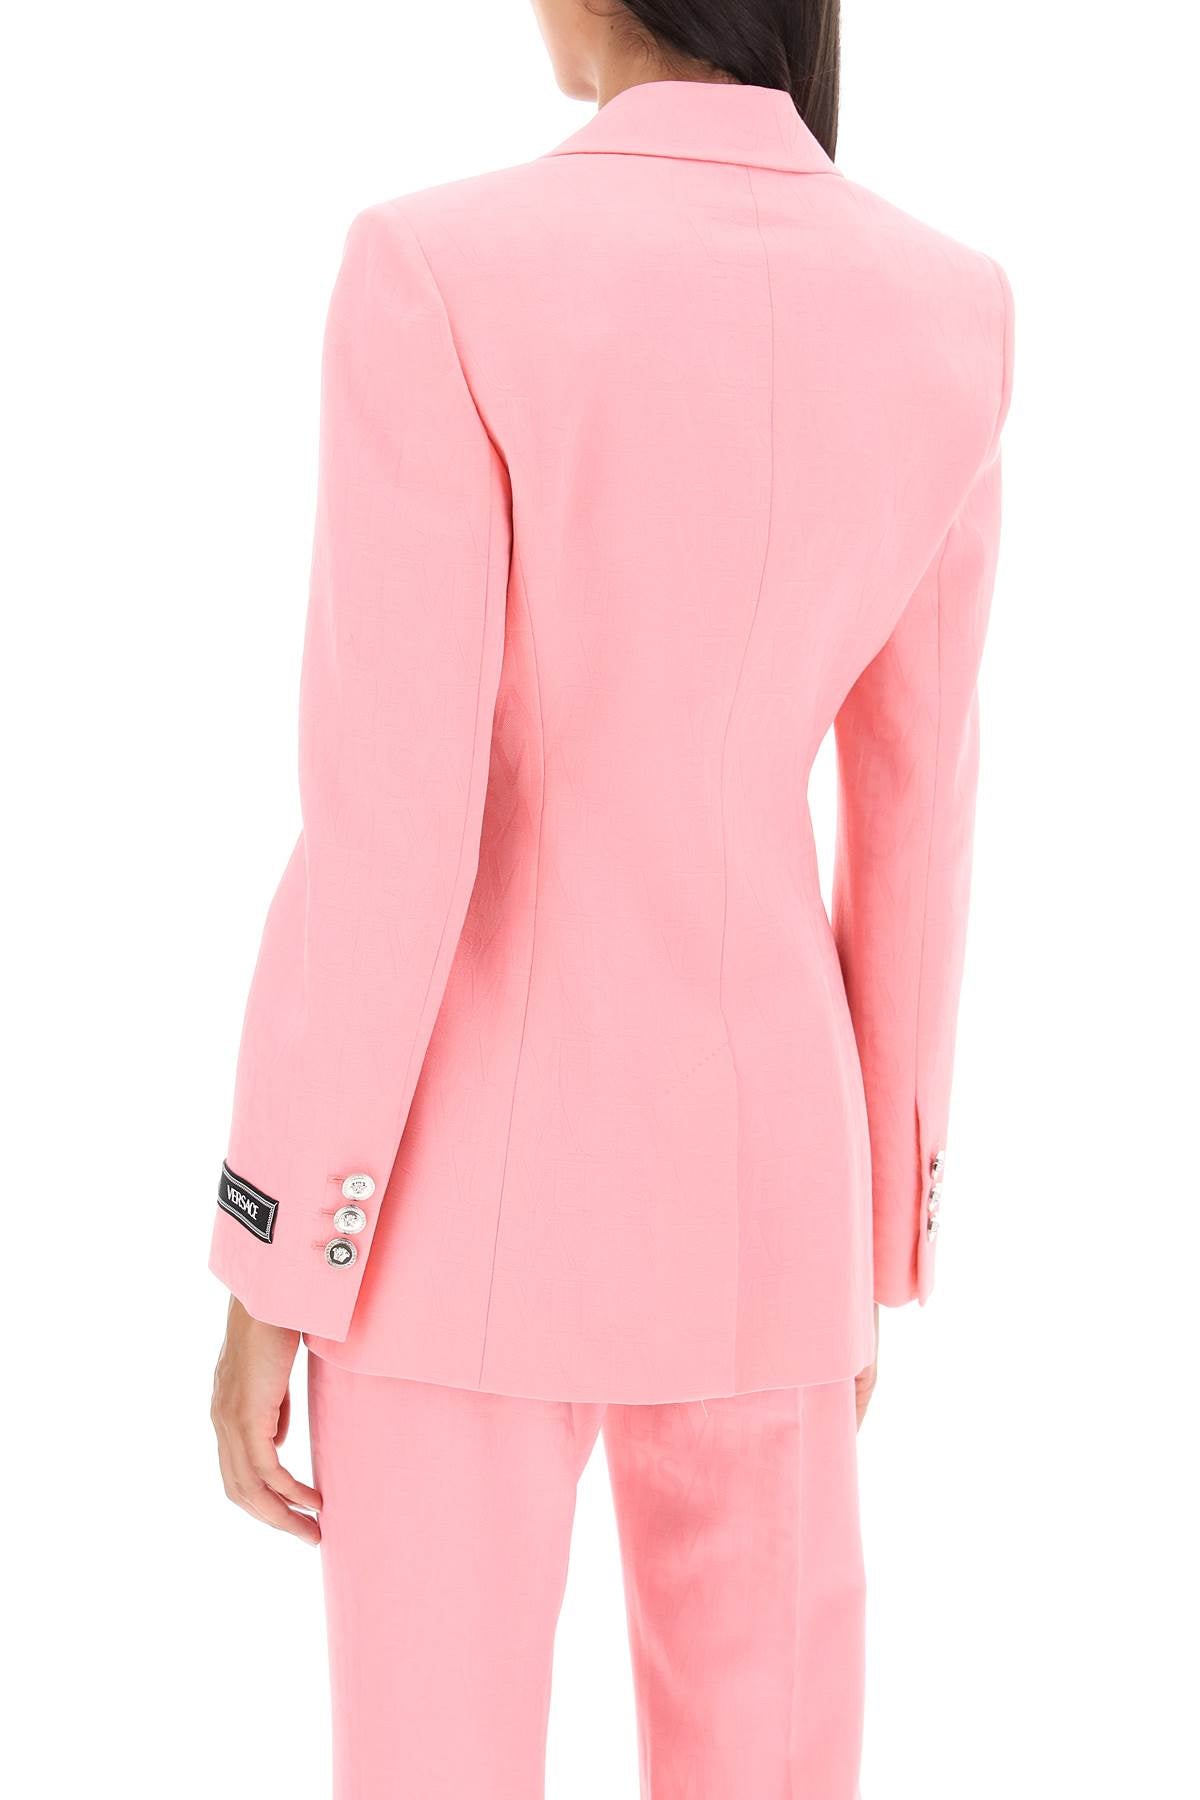 Pink Wool Single-Breasted Jacket in Versace Allover Pattern